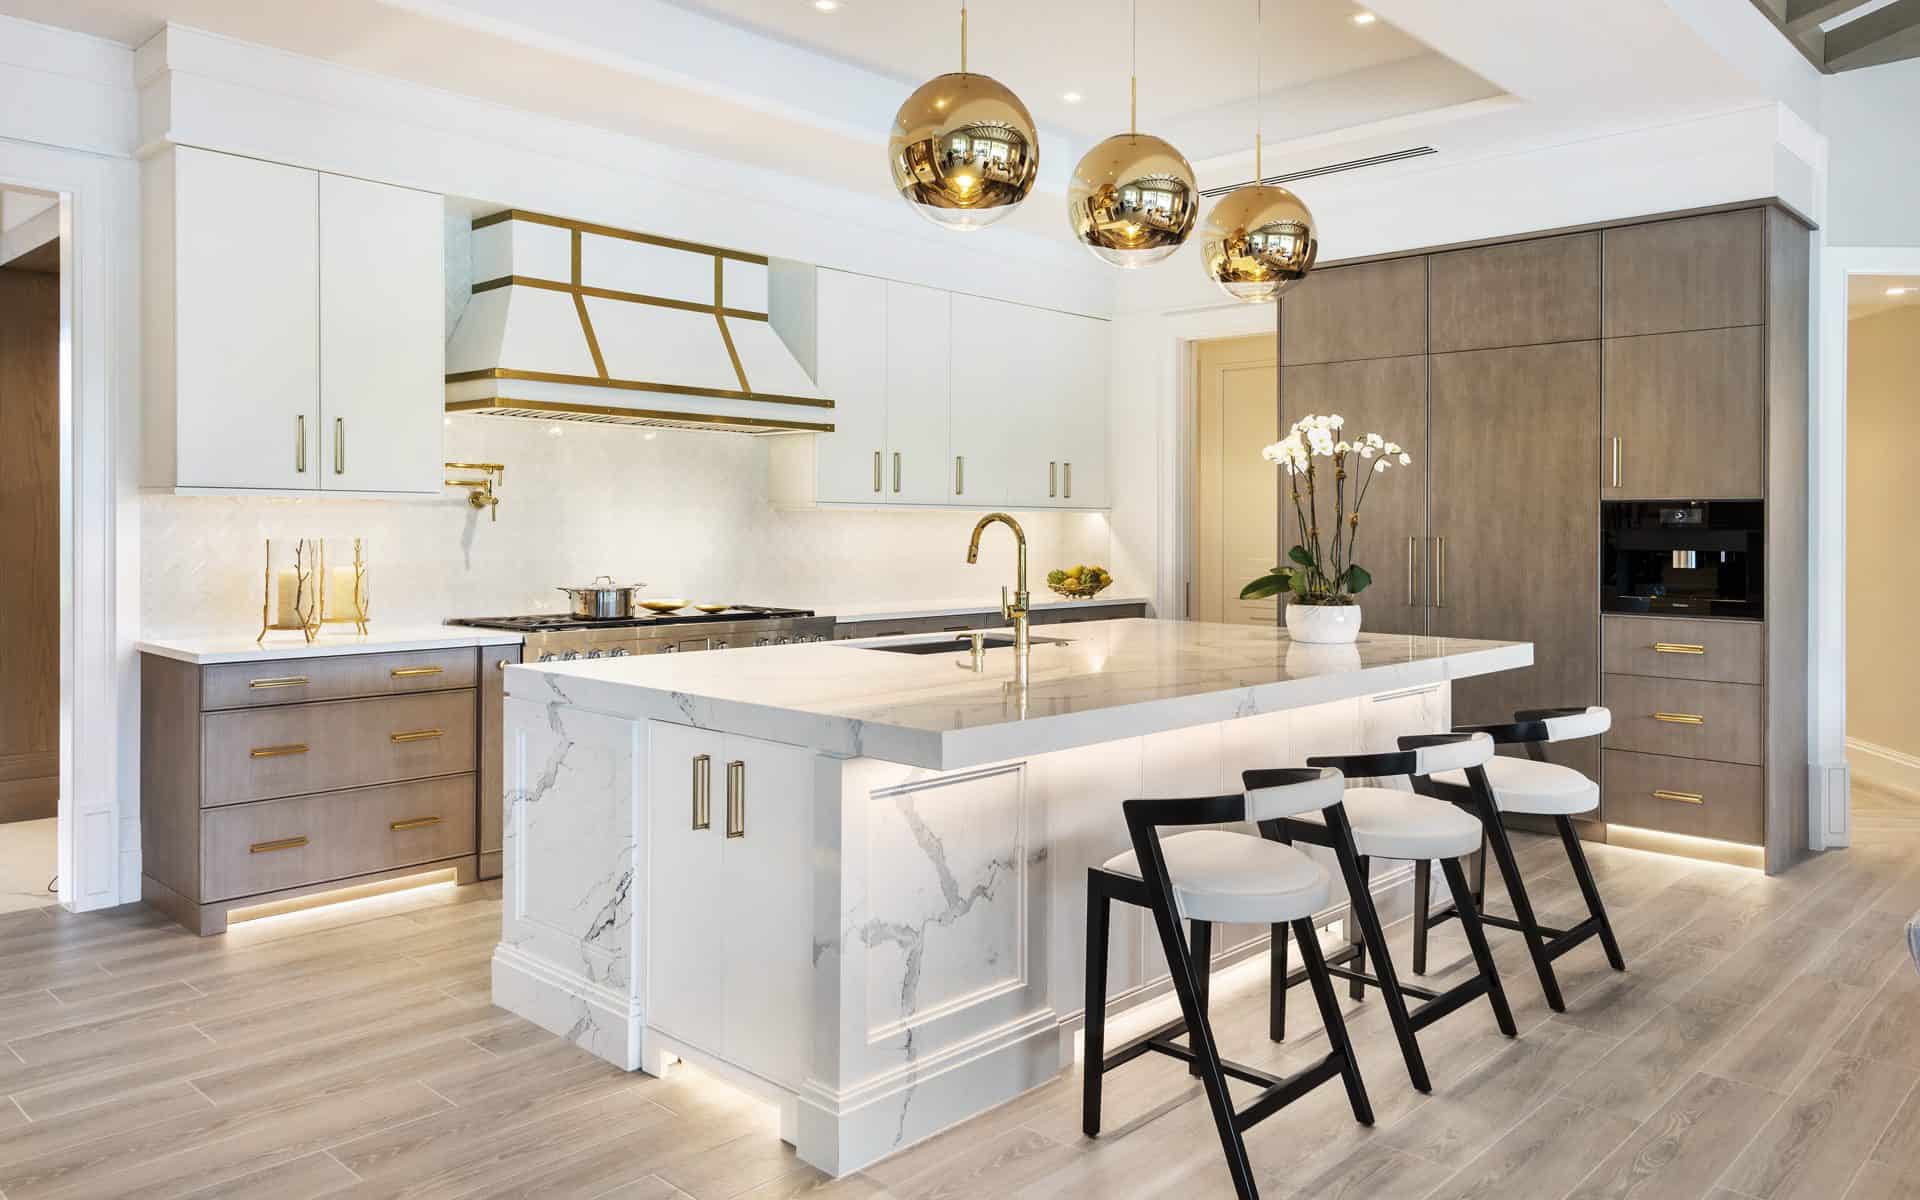 Stunning white classic kitchen features custom Bilotta cabinets and range, white and gray marble custom island and gold pendant lights.